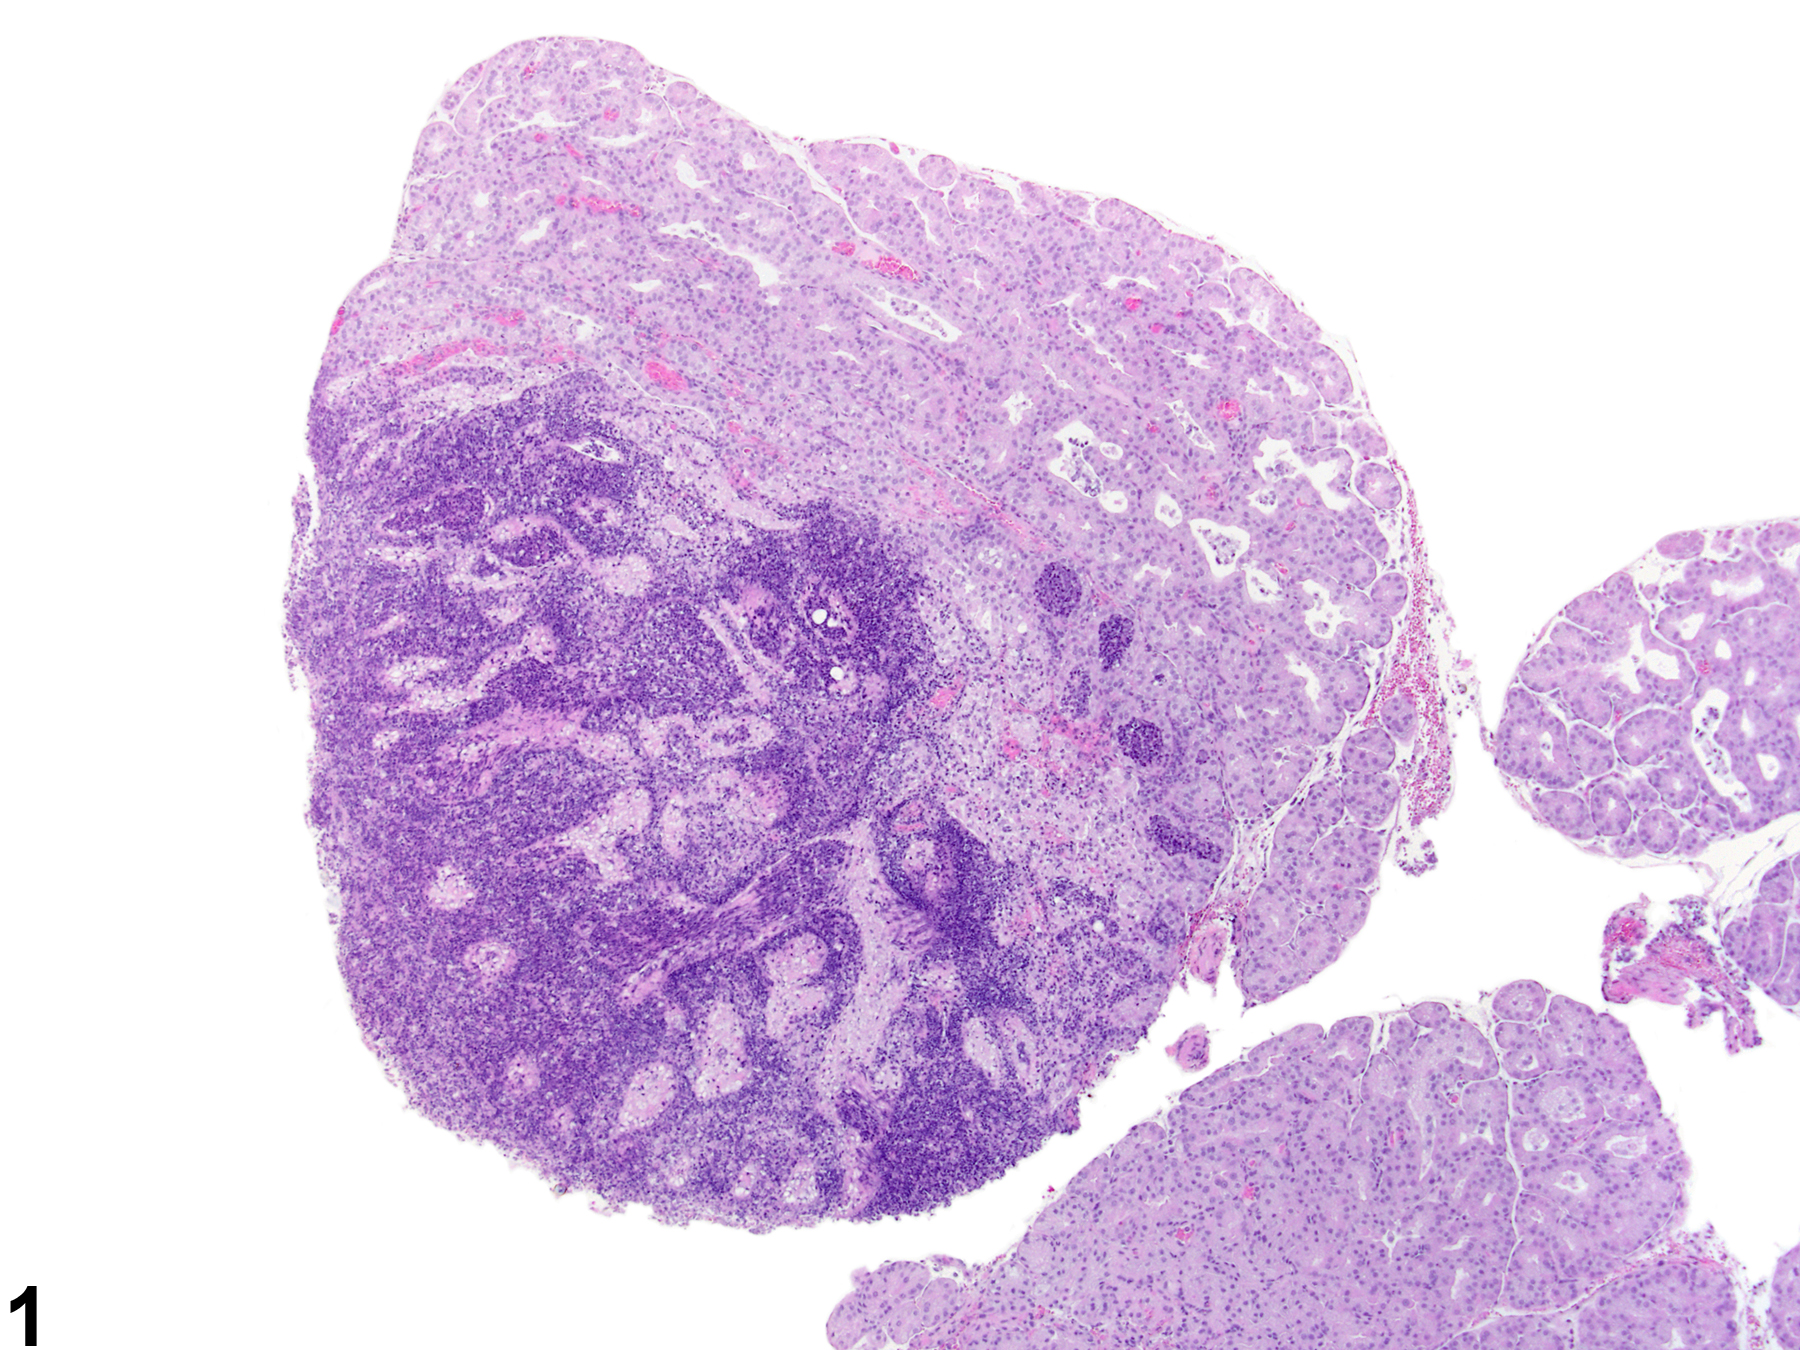 Image of inflammation in the Harderian gland from a female Harlan Sprague Dawley rat in a chronic study